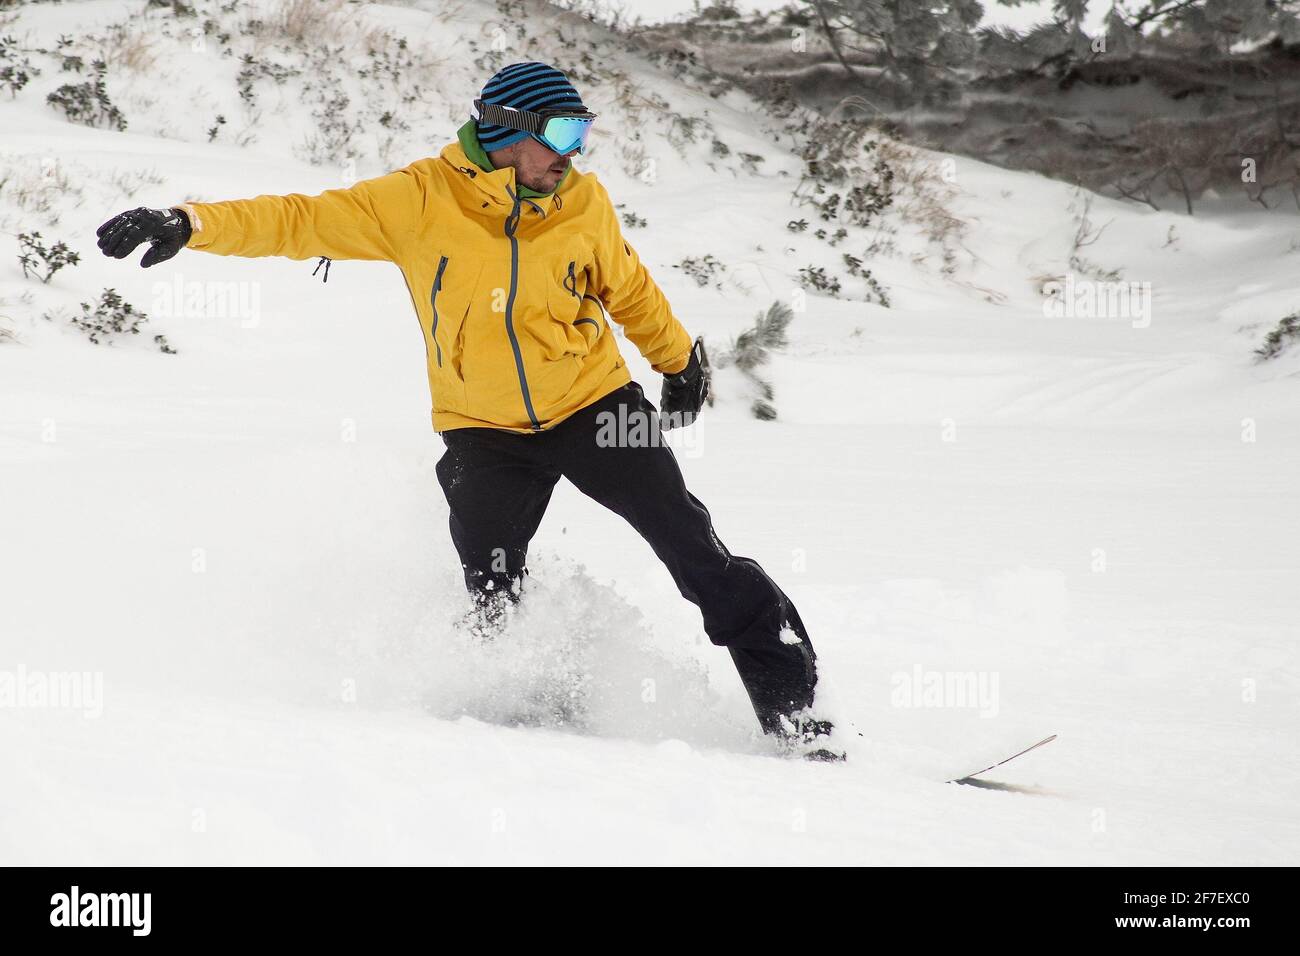 A snowboarder in snow going downhill amd jumping. Boarder with yellow clothing with black trousers and orange board riding and jumping over snow on a Stock Photo